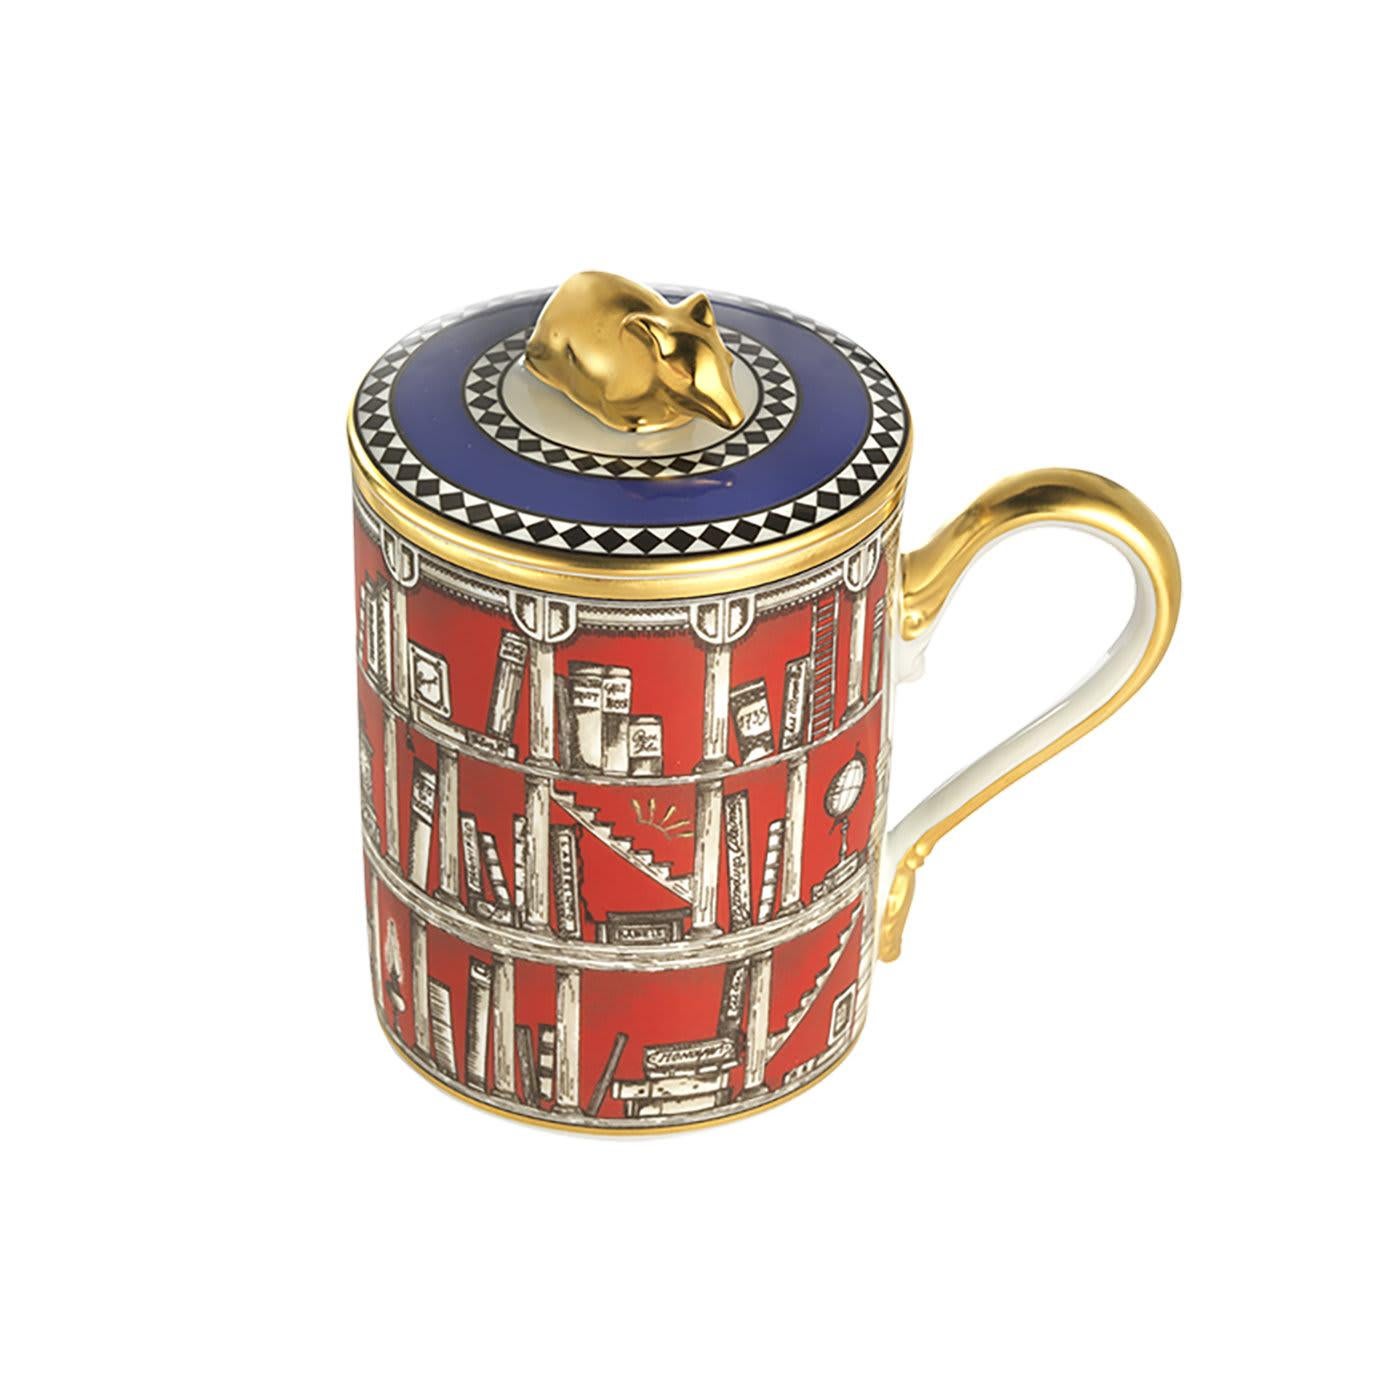 Imagine sipping your warm drink from this elegant, eighteenth-century style decorated mug, crafted from the most exquisite porcelain. Whether it be a gift for yourself or someone else, this superb piece, with its precious gold Mouse Lid, will be a